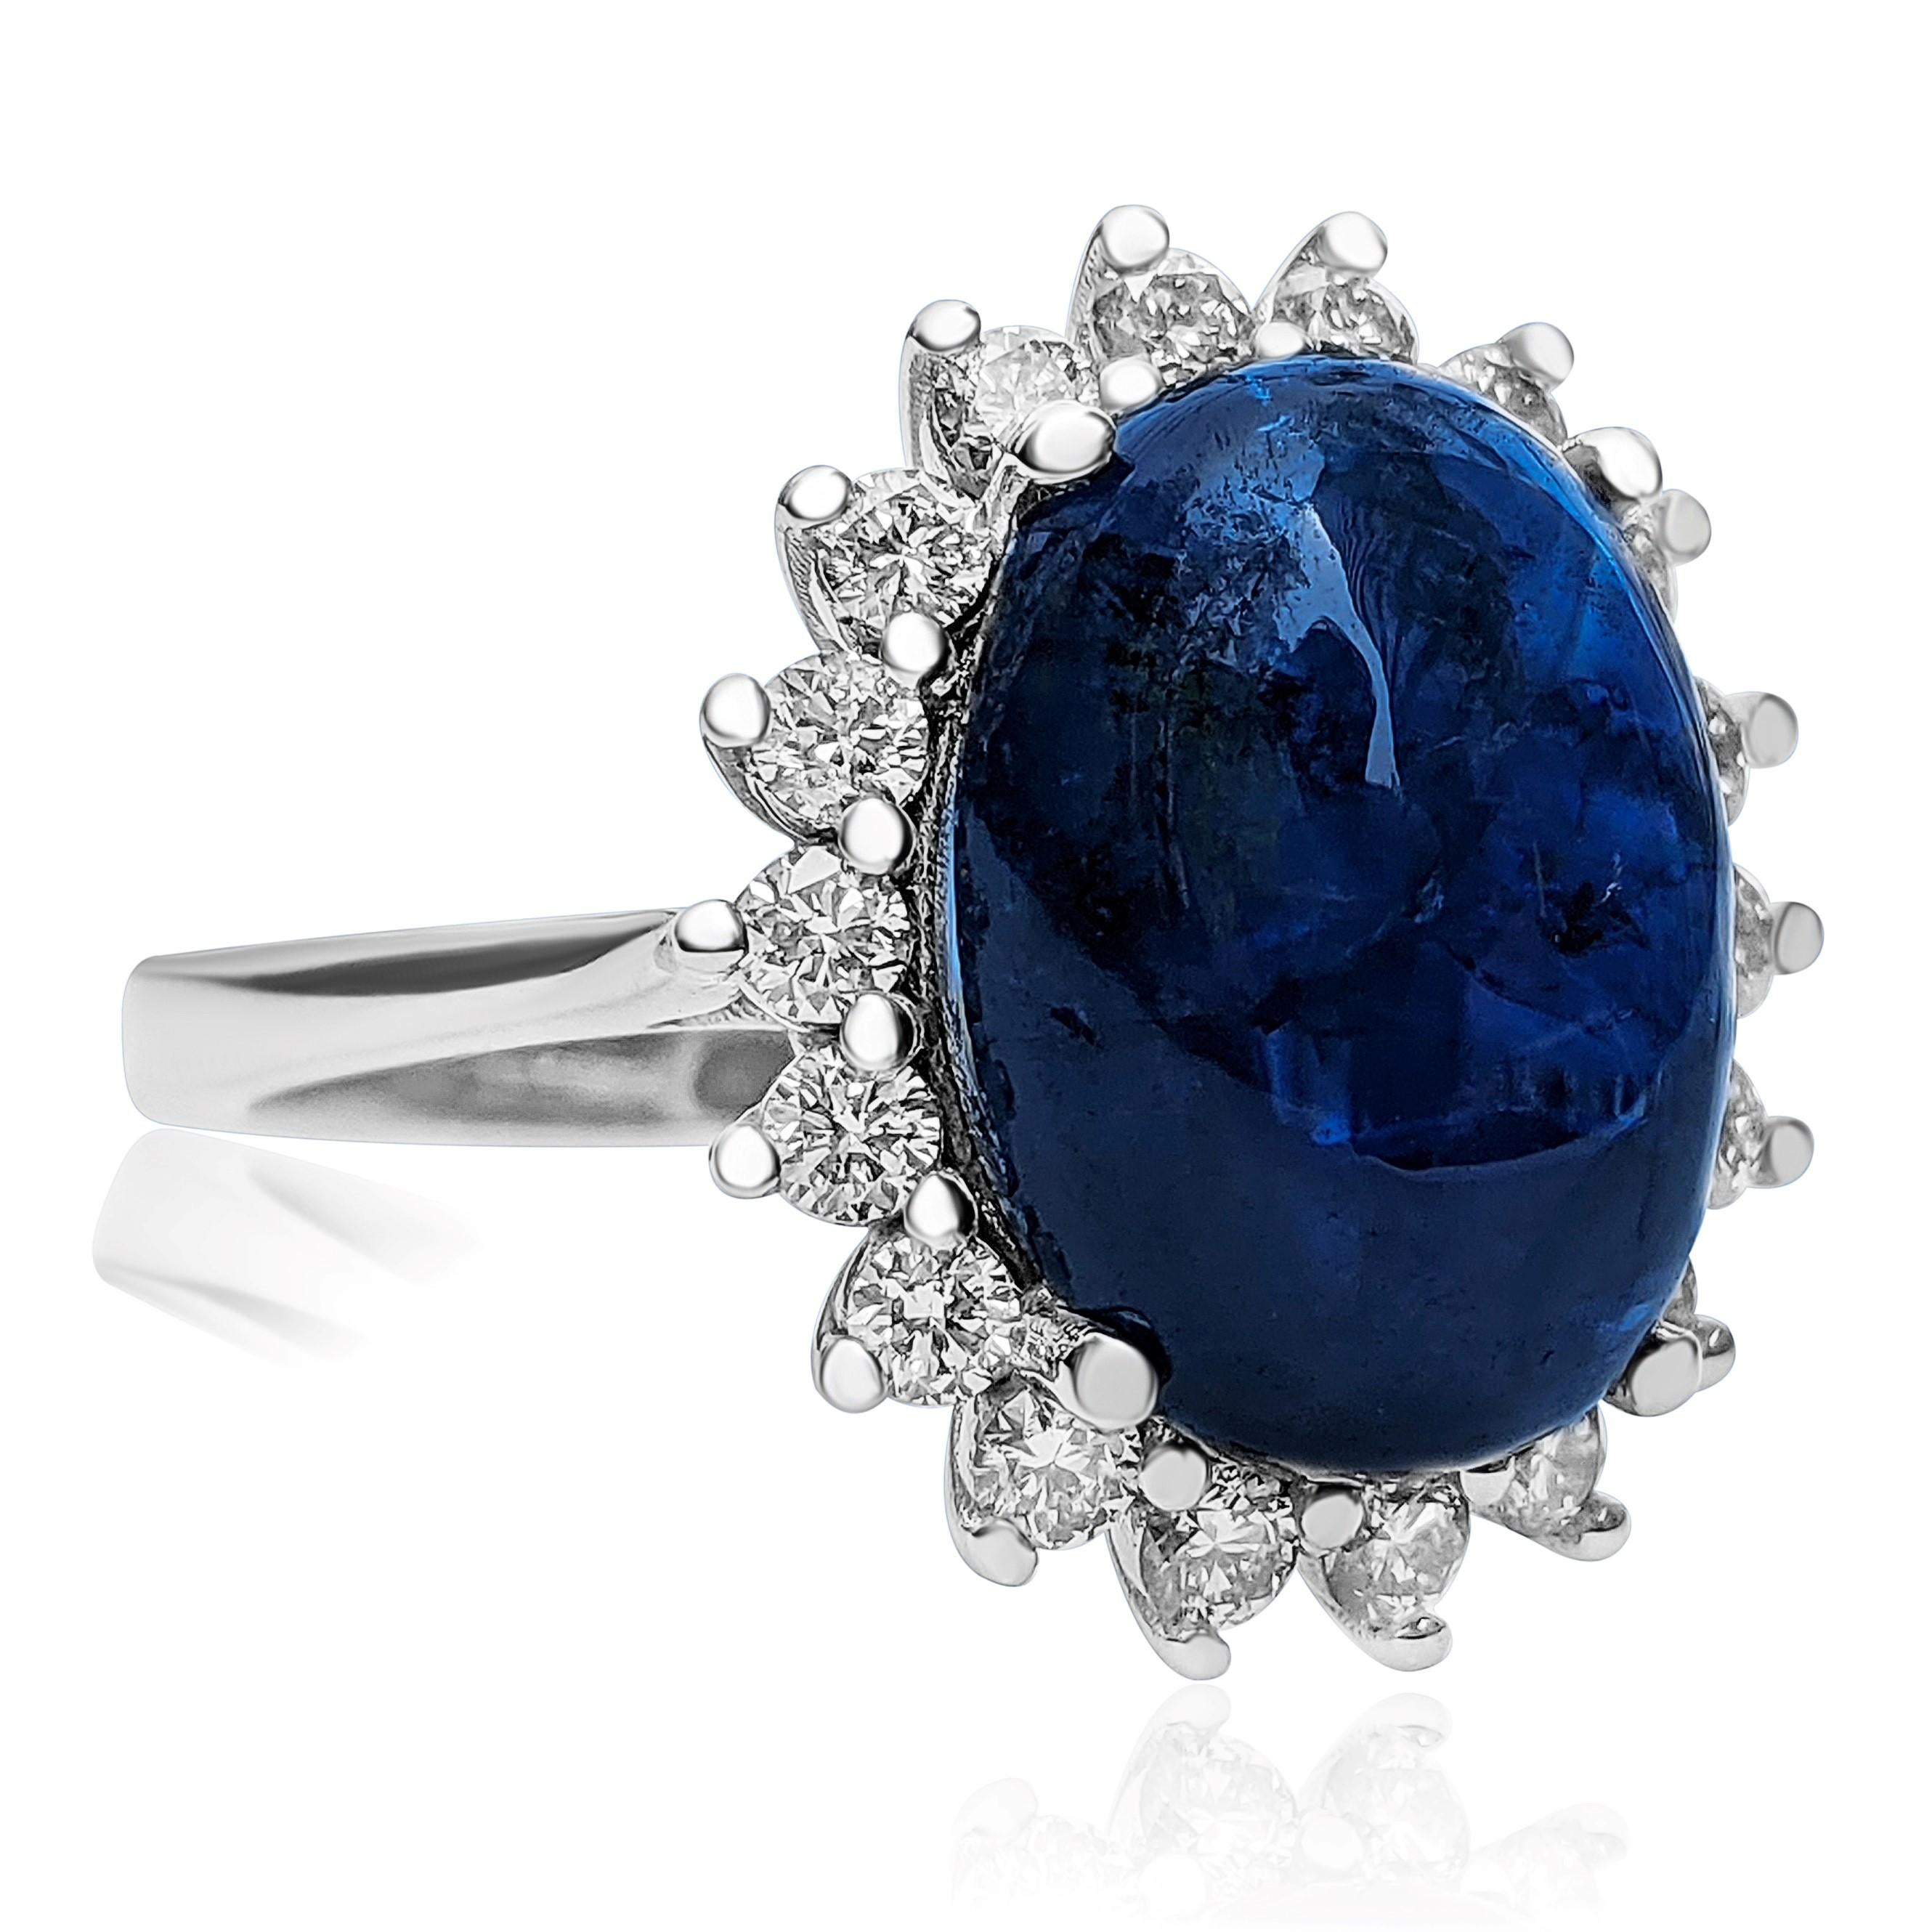 Women's 9.62 Carat Blue Sapphire and 0.70 Ct Diamonds Ring, 14 Kt, White Gold, Ring